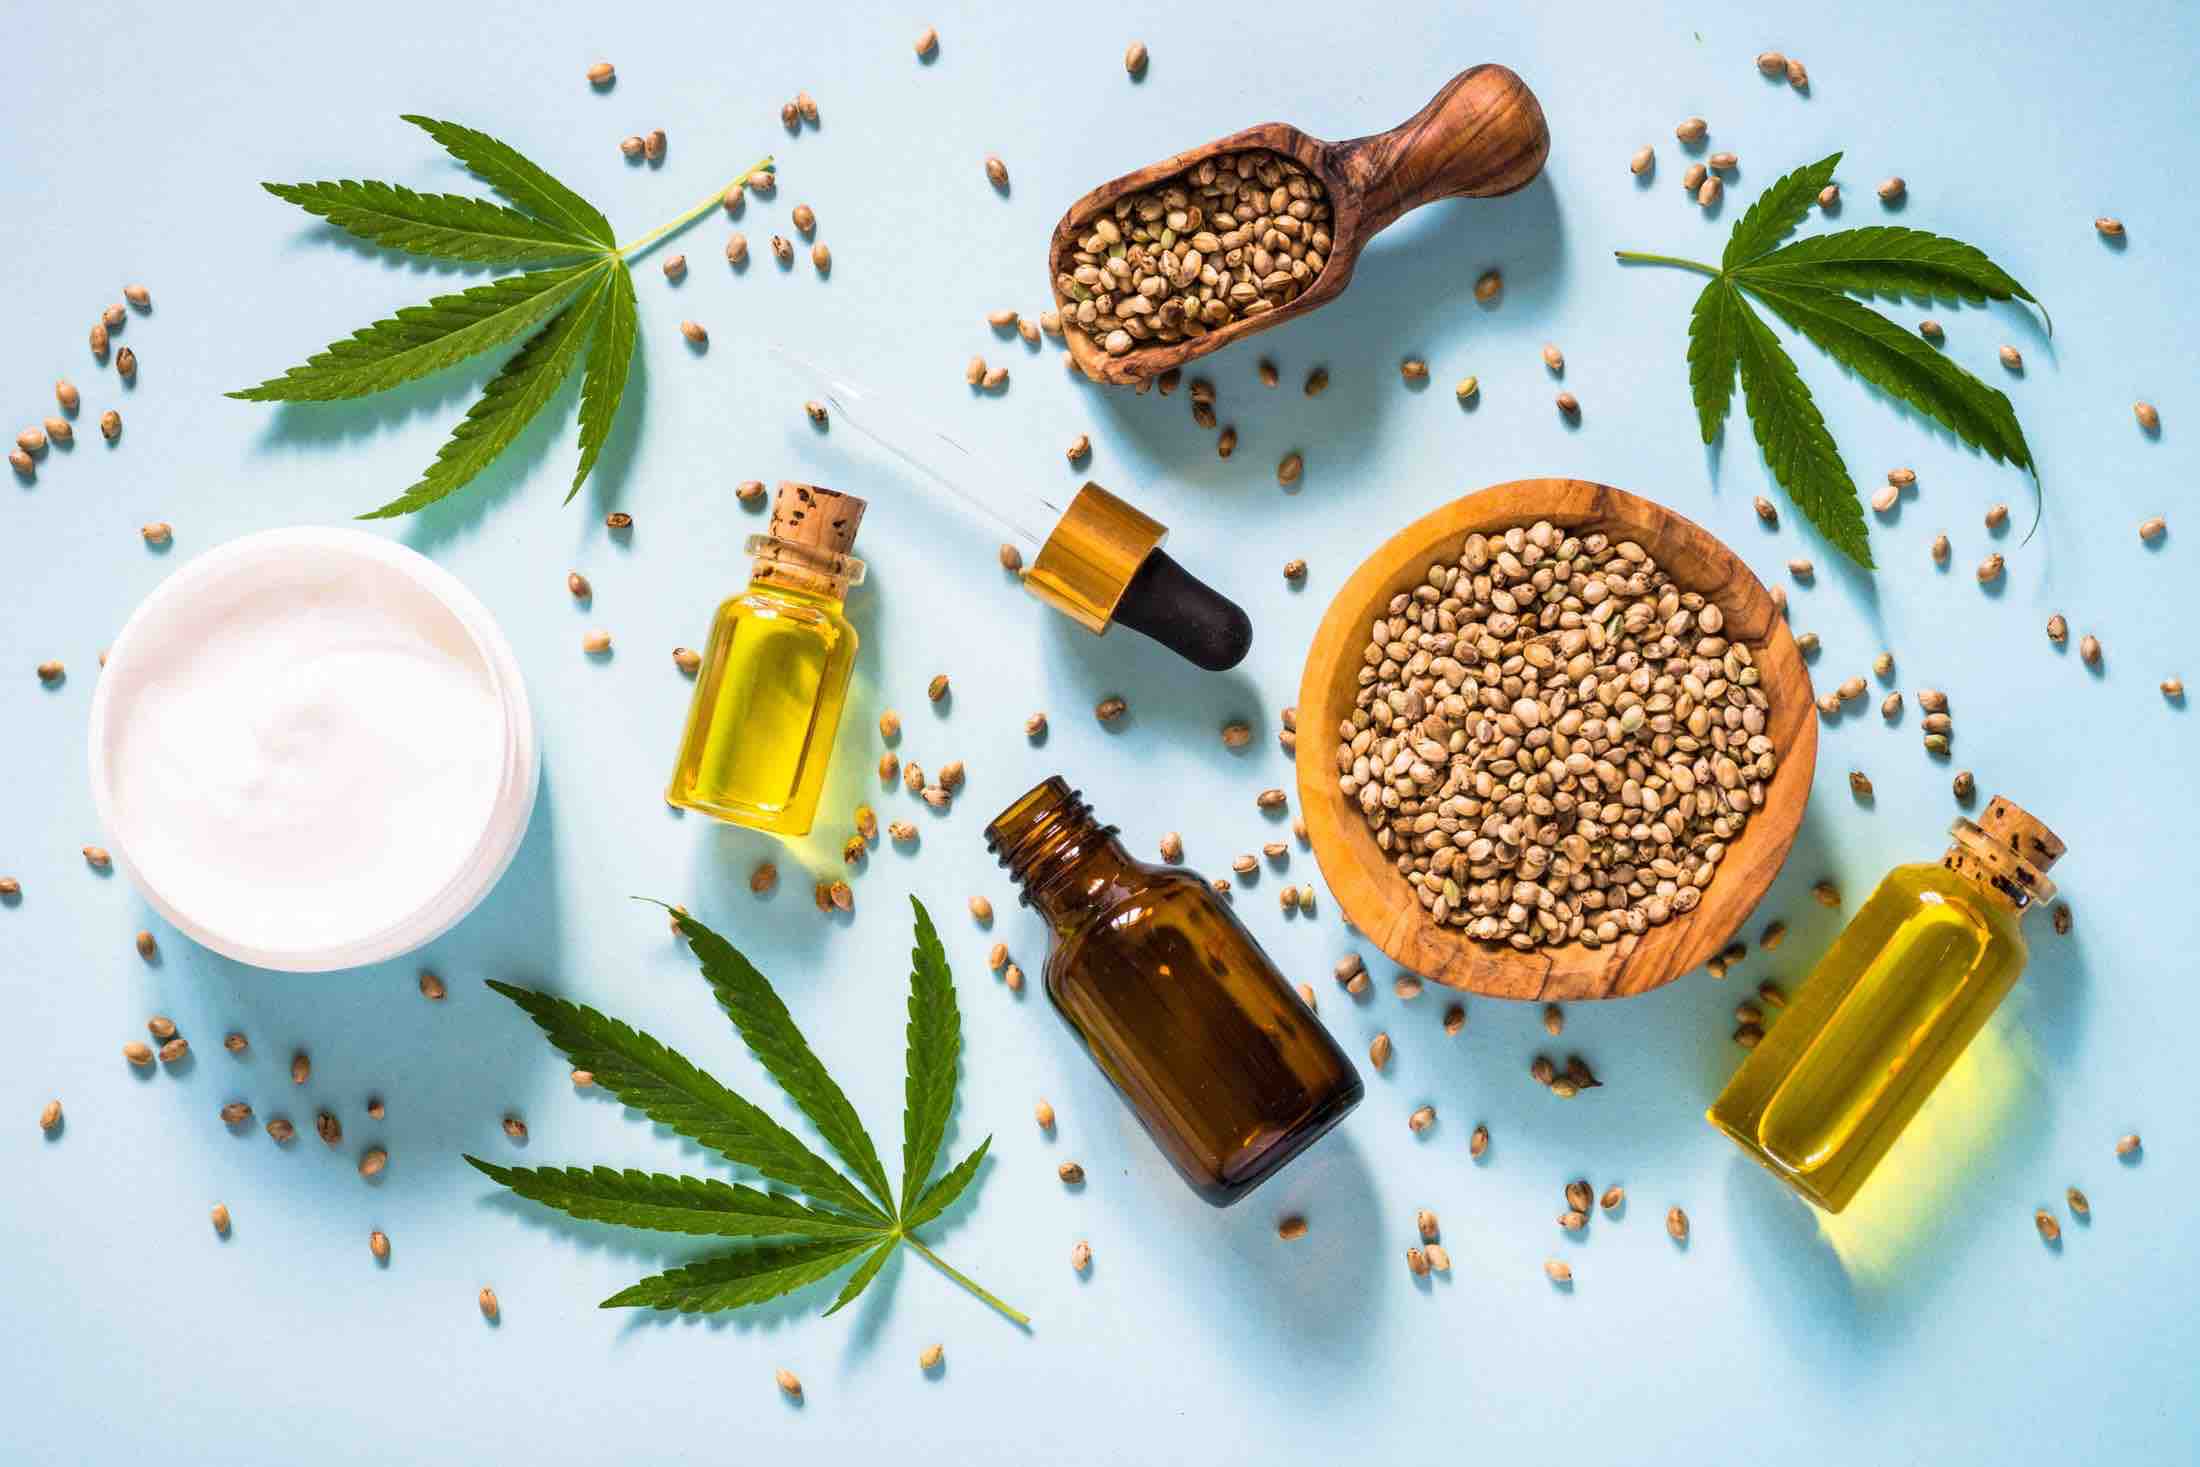 Tincture, Edible or Topical – How to Choose